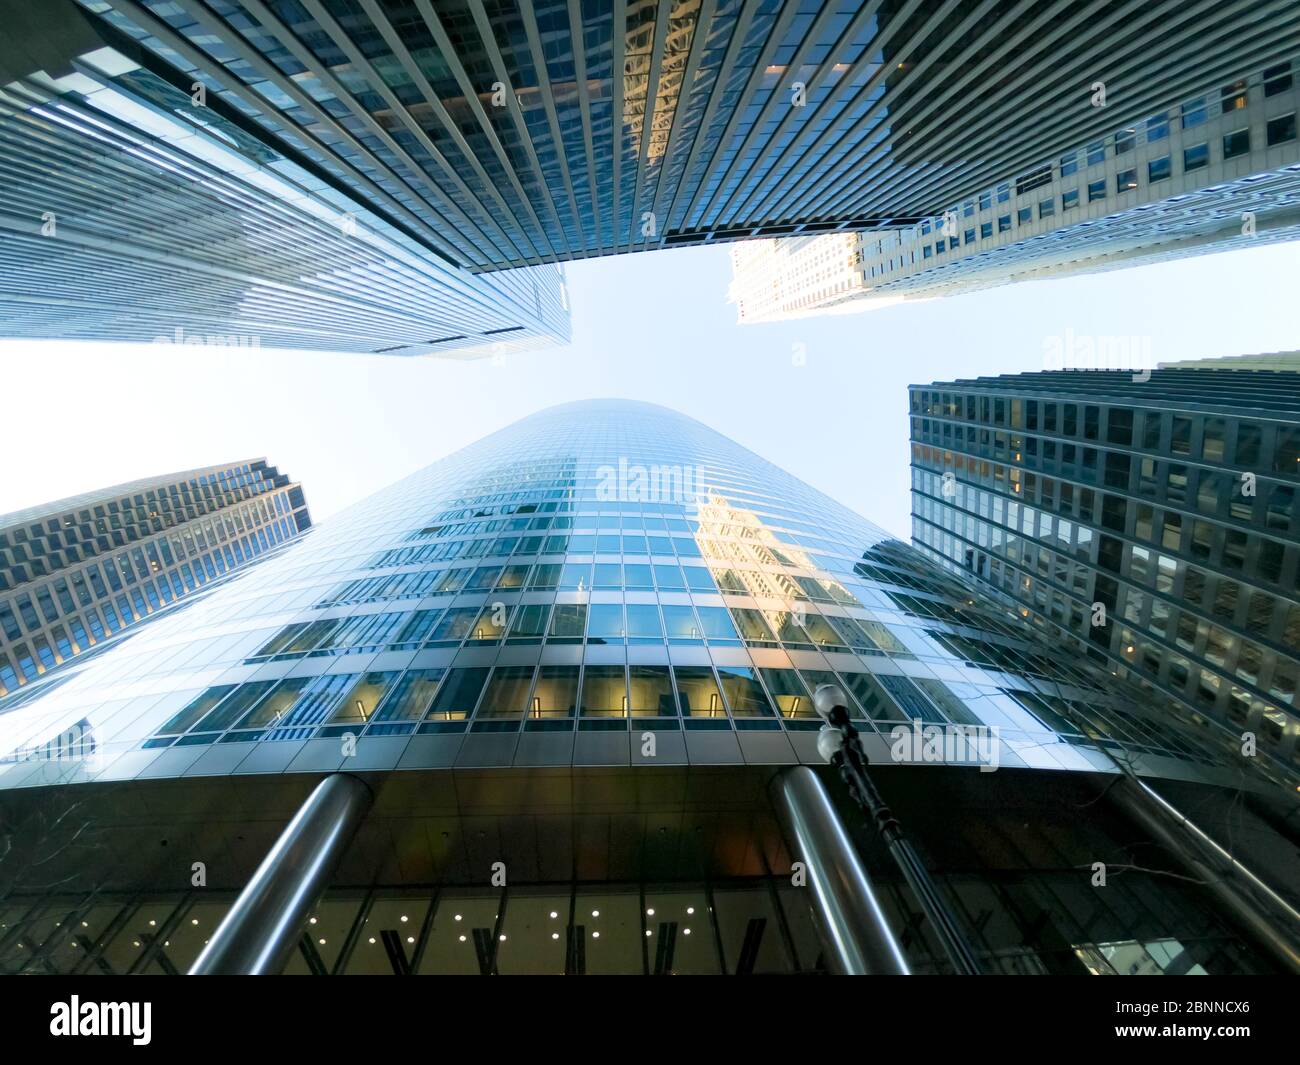 Upward view of chicago skyscraper busnesses and tall office buildings.  Showcasing various architectural styles. Illinois usa. Stock Photo